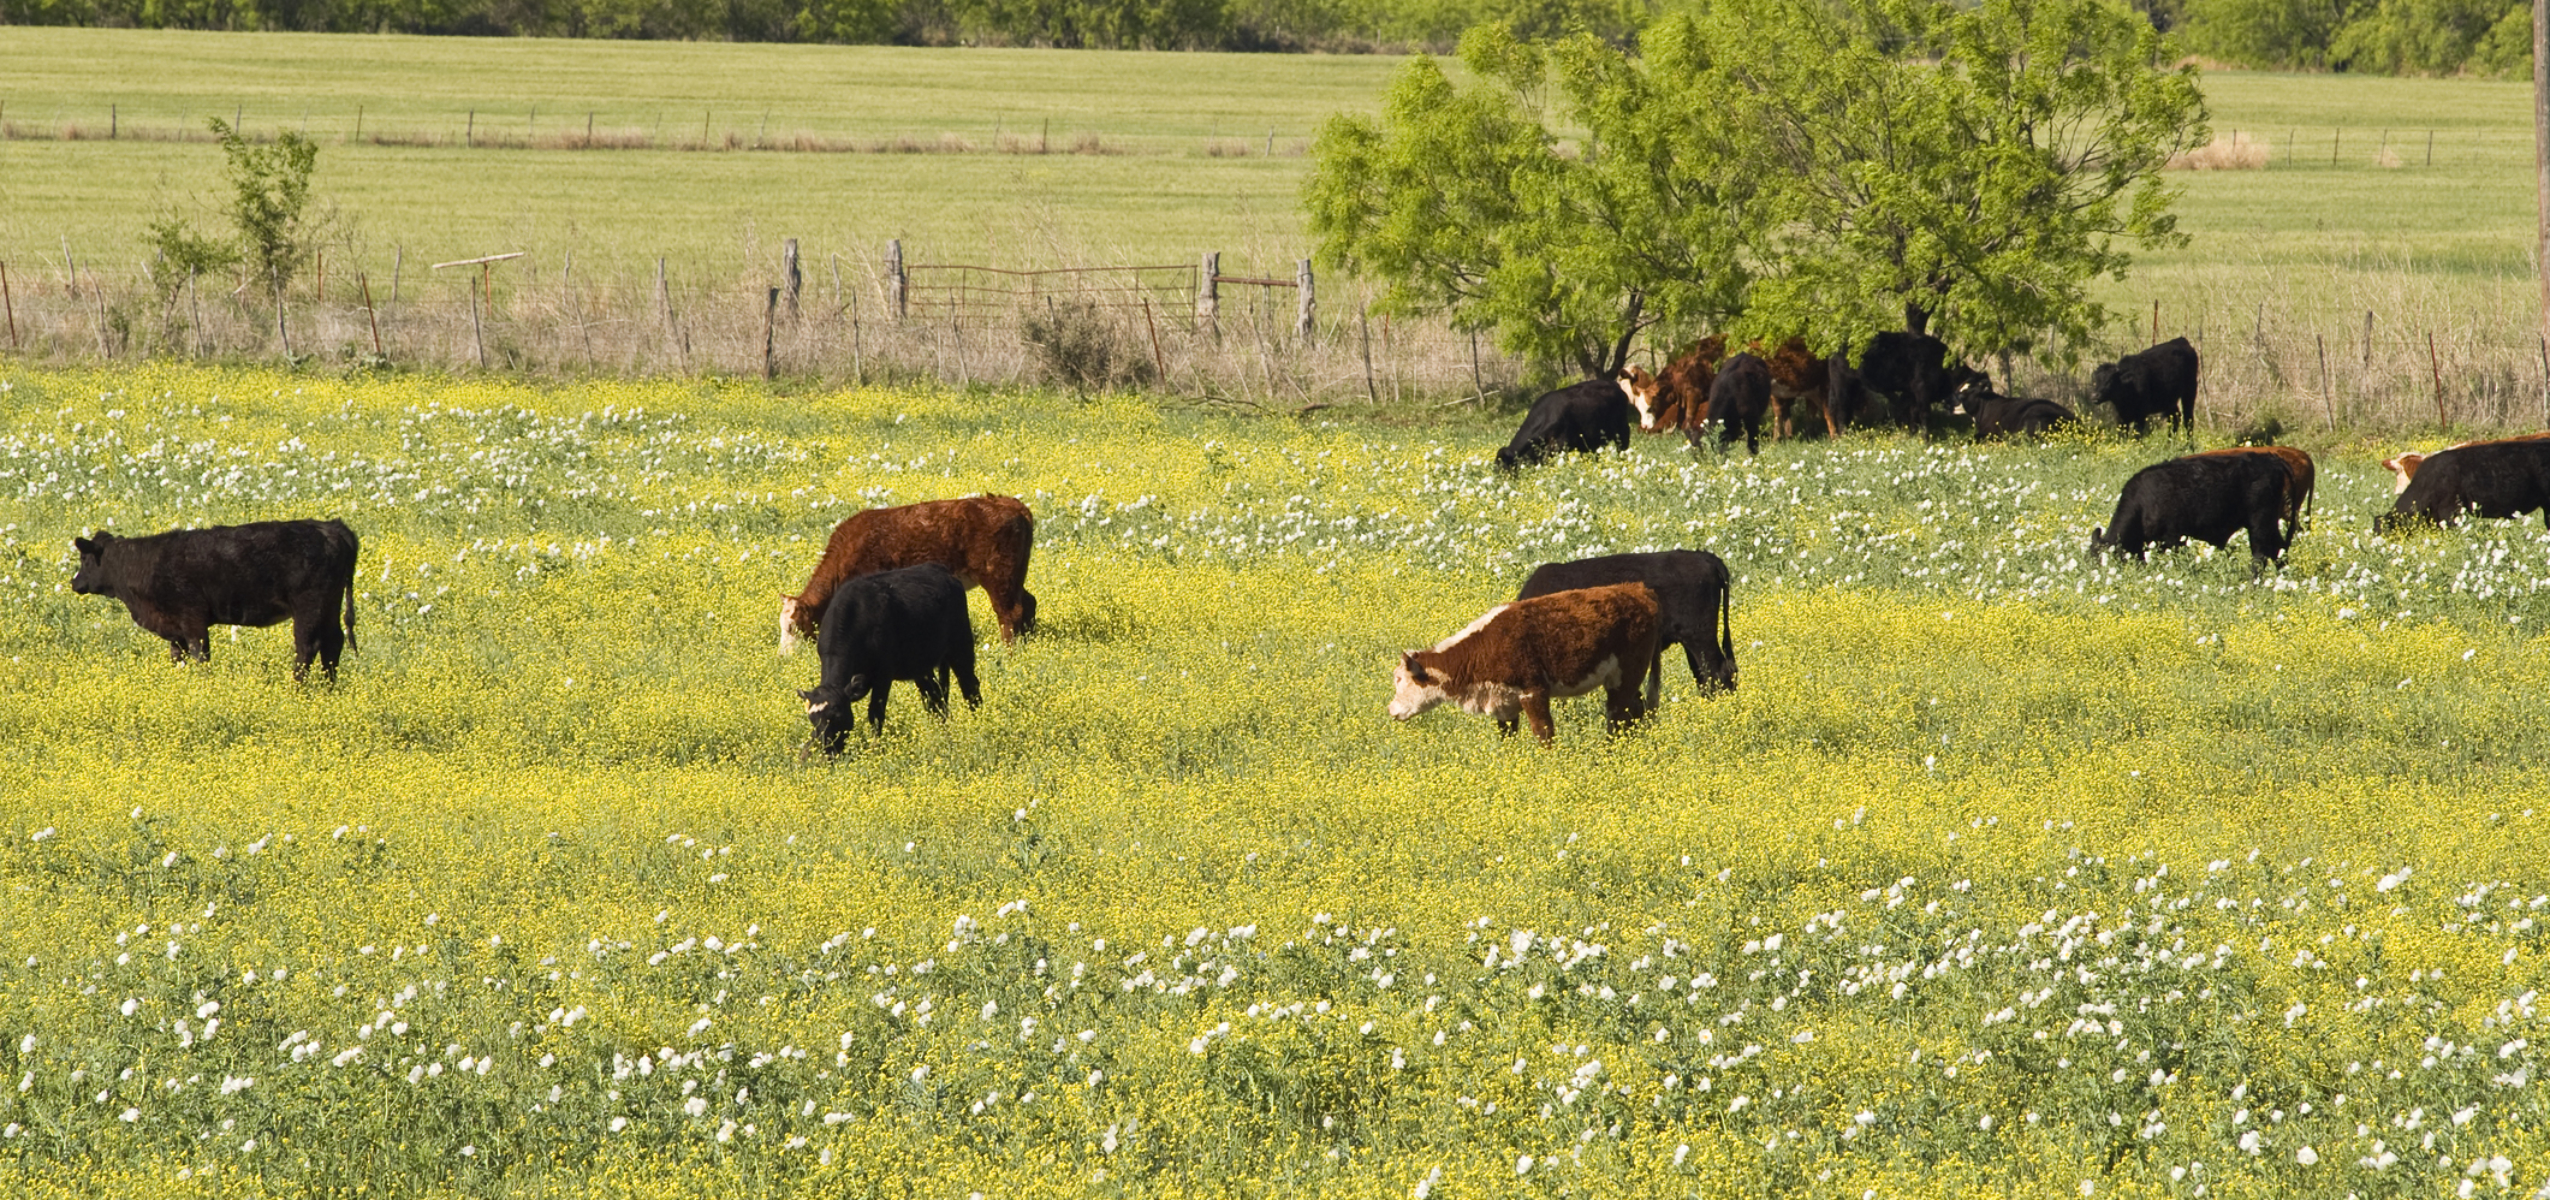 Cows and Wildflowers